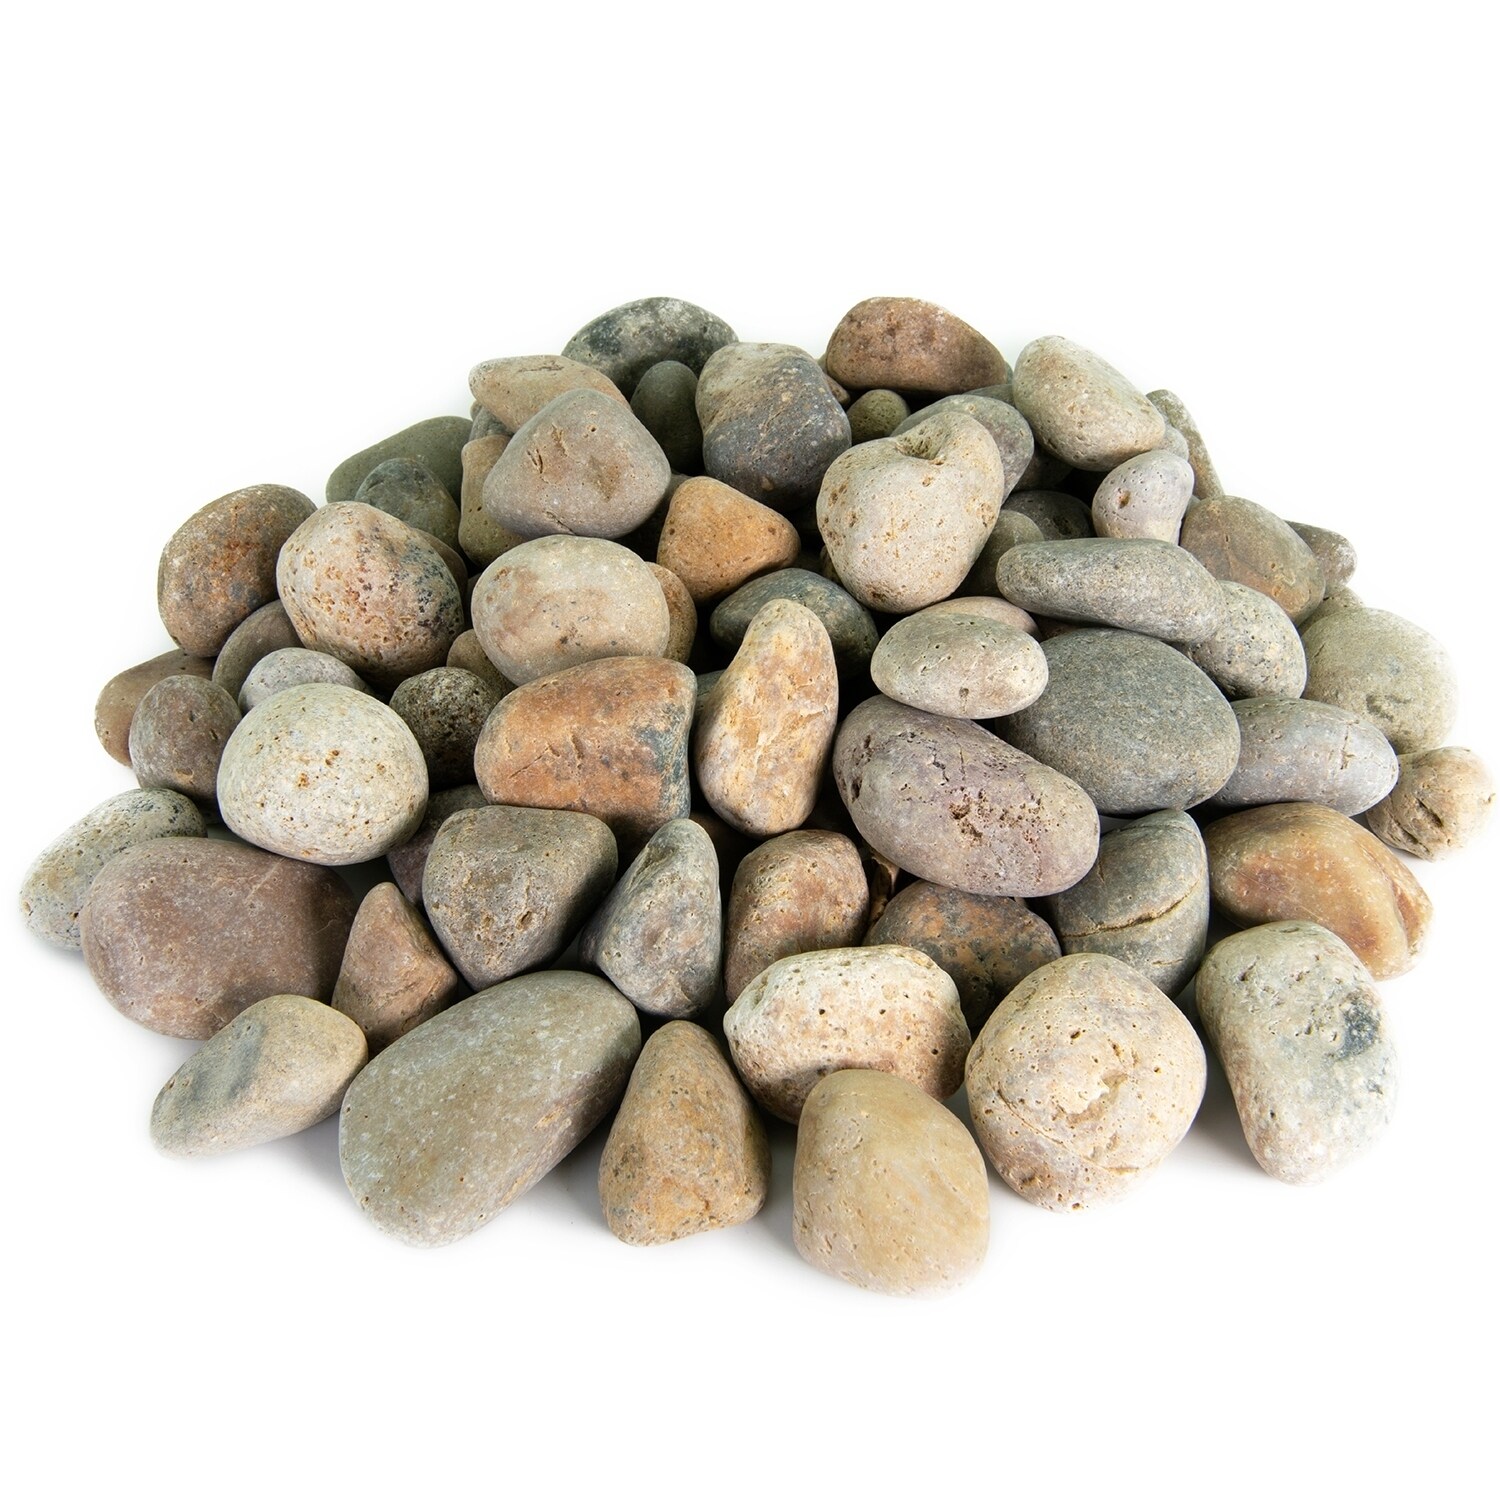 20 Pack Flat Rocks for Painting, Craft Kindness Stones for Kids Arts, River  Pebbles DIY (2-3 in) 